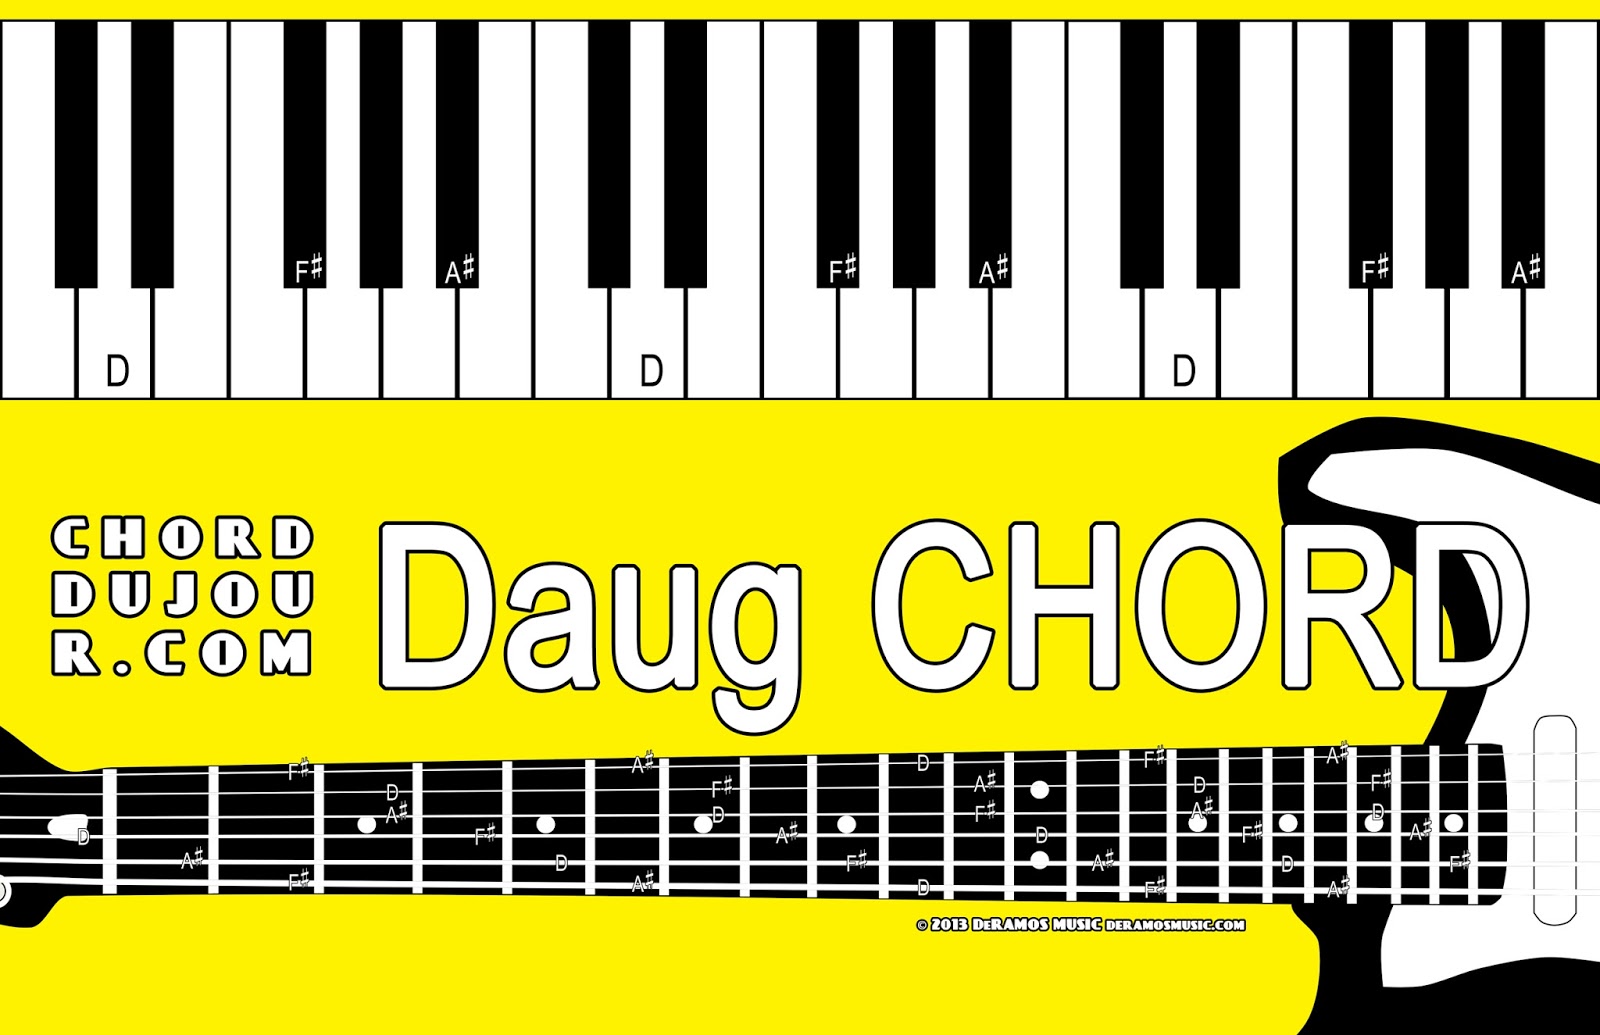 File D Augmented Chord For Guitar Svg Wikimedia Commons